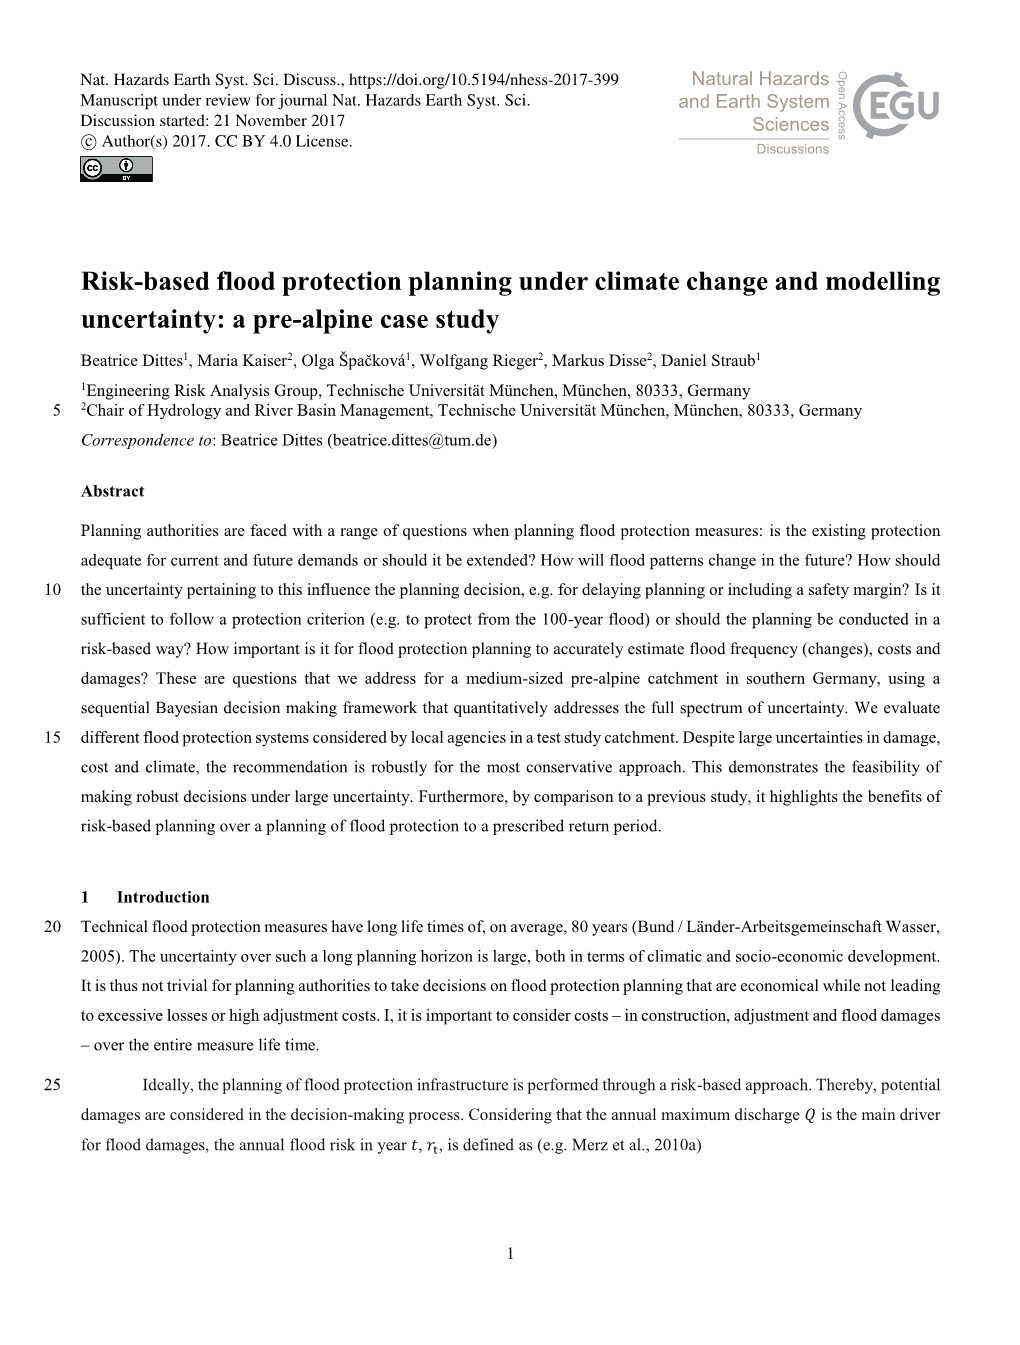 Risk-Based Flood Protection Planning Under Climate Change and Modelling Uncertainty: a Pre-Alpine Case Study